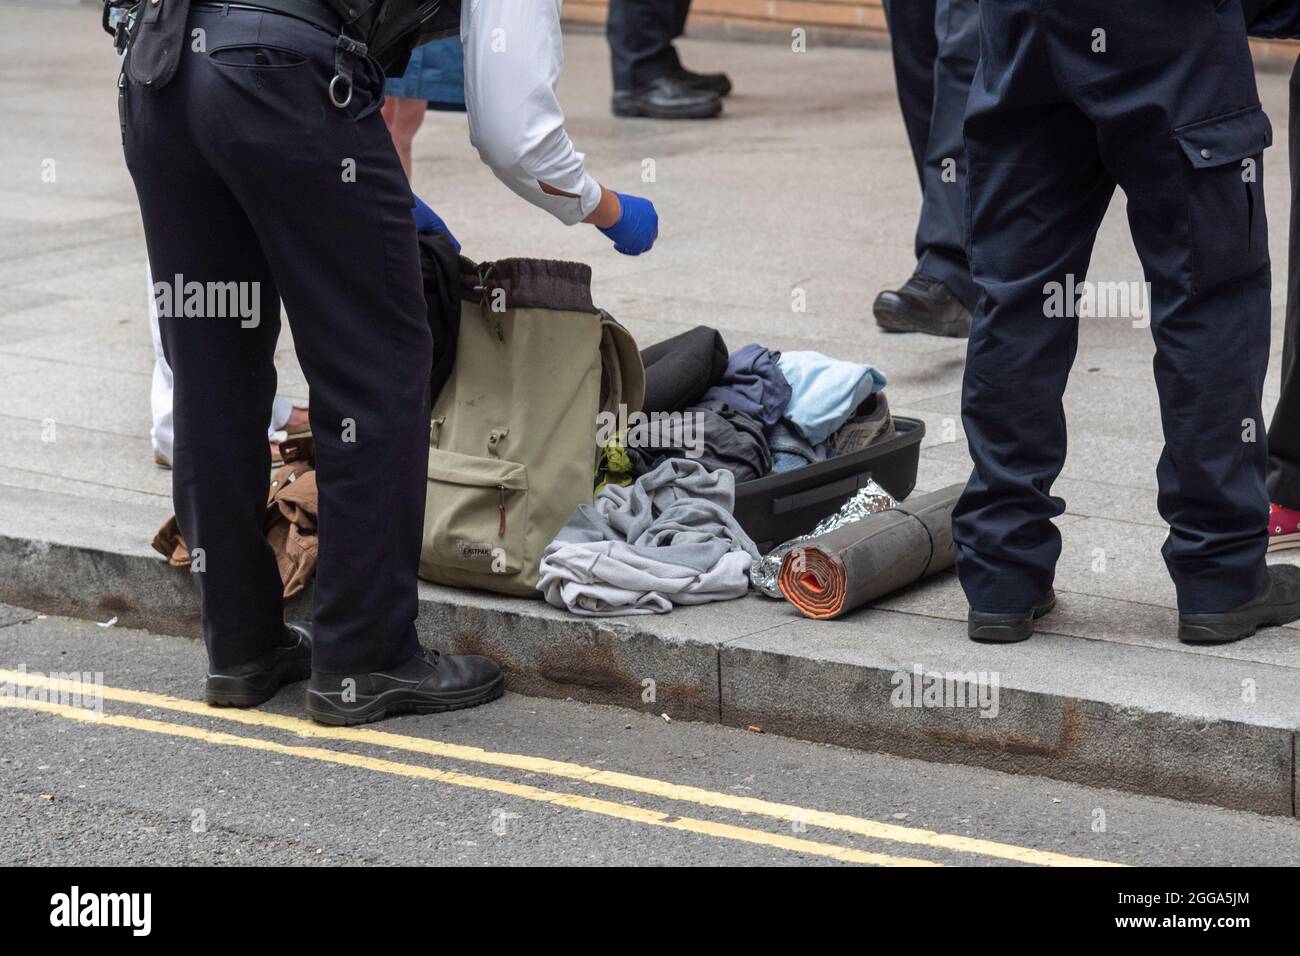 London, UK. 30th Aug, 2021. Police stop and search activists at the News Corp building during the Extinction Rebellion protest as they hold 'The Impossible Tea Party' in London. Credit: SOPA Images Limited/Alamy Live News Stock Photo